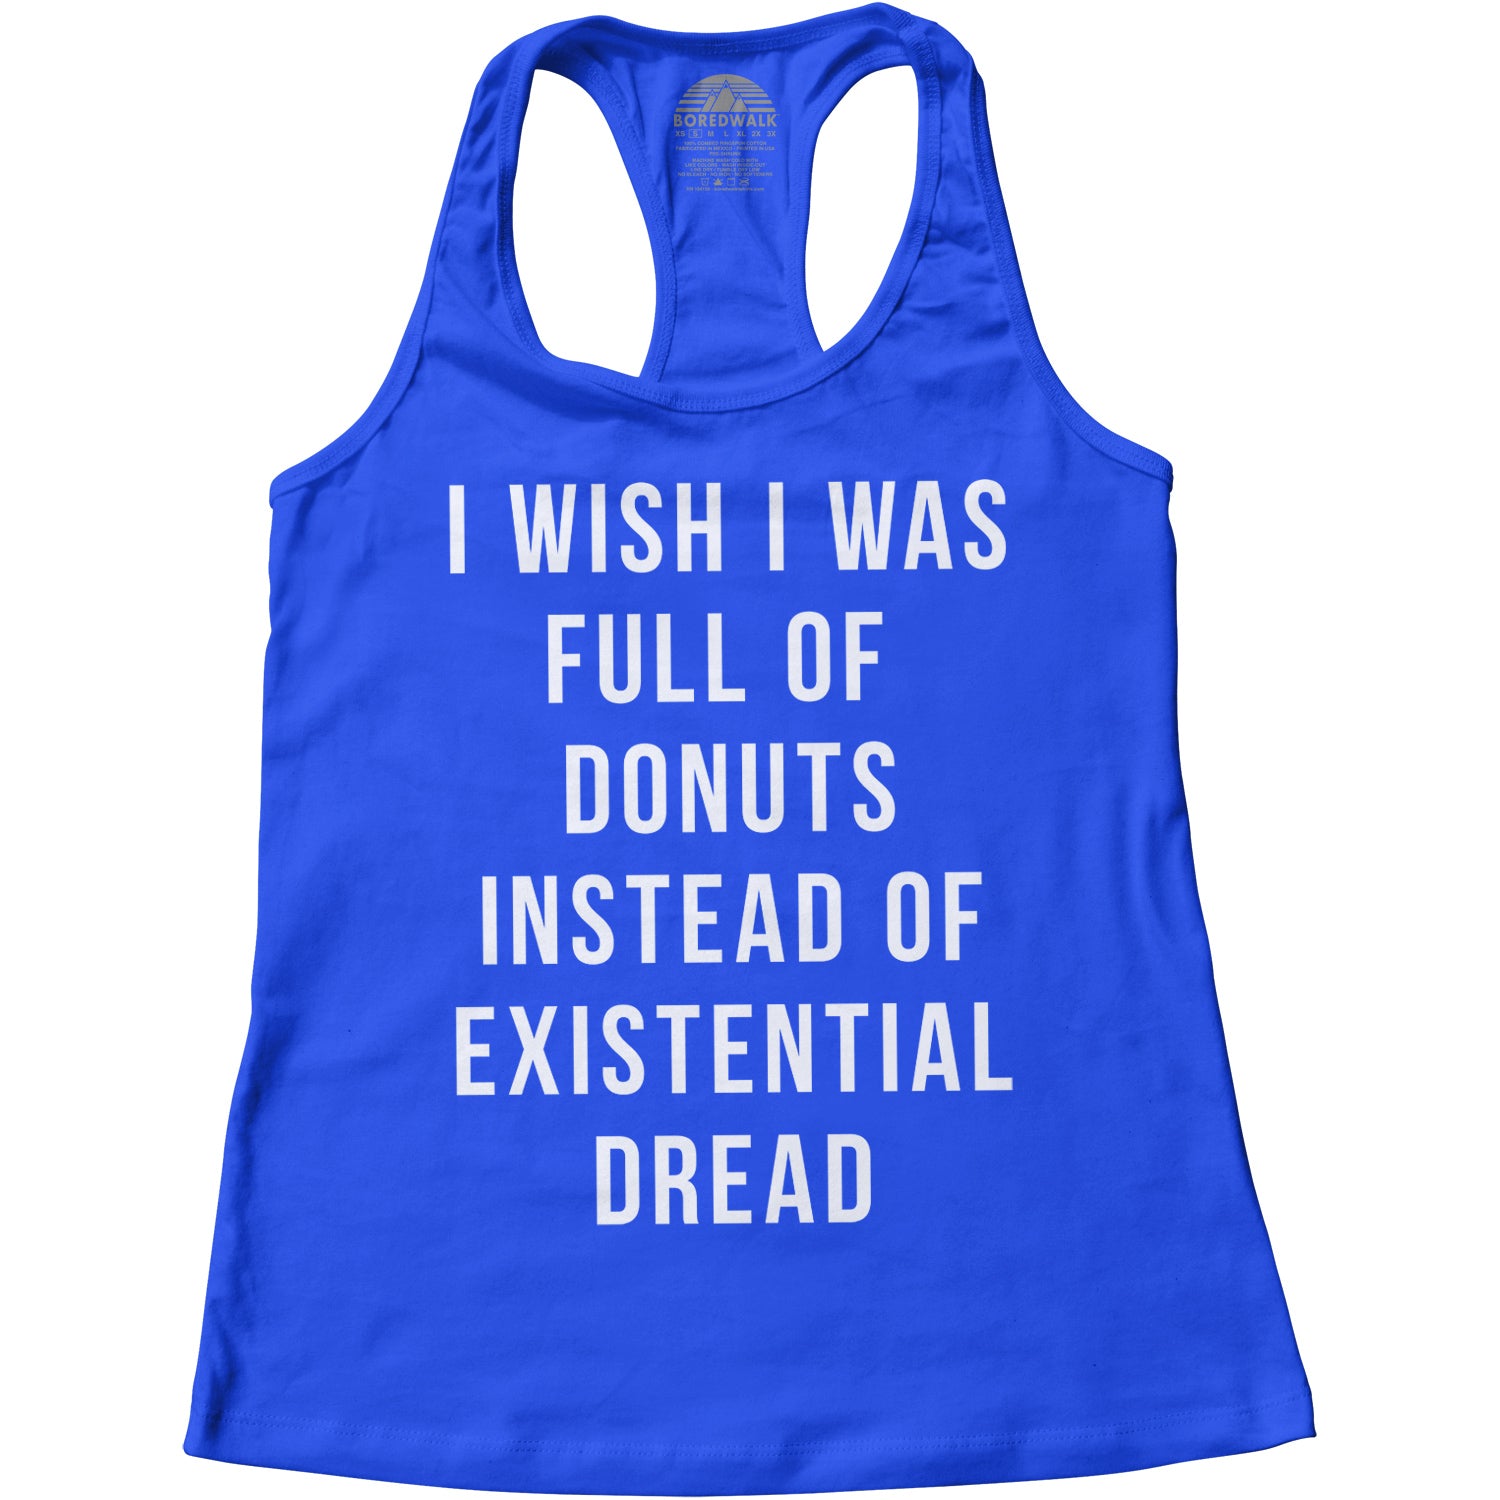 Women's I Wish I Was Full of Donuts Instead of Existential Dread Racerback Tank Top